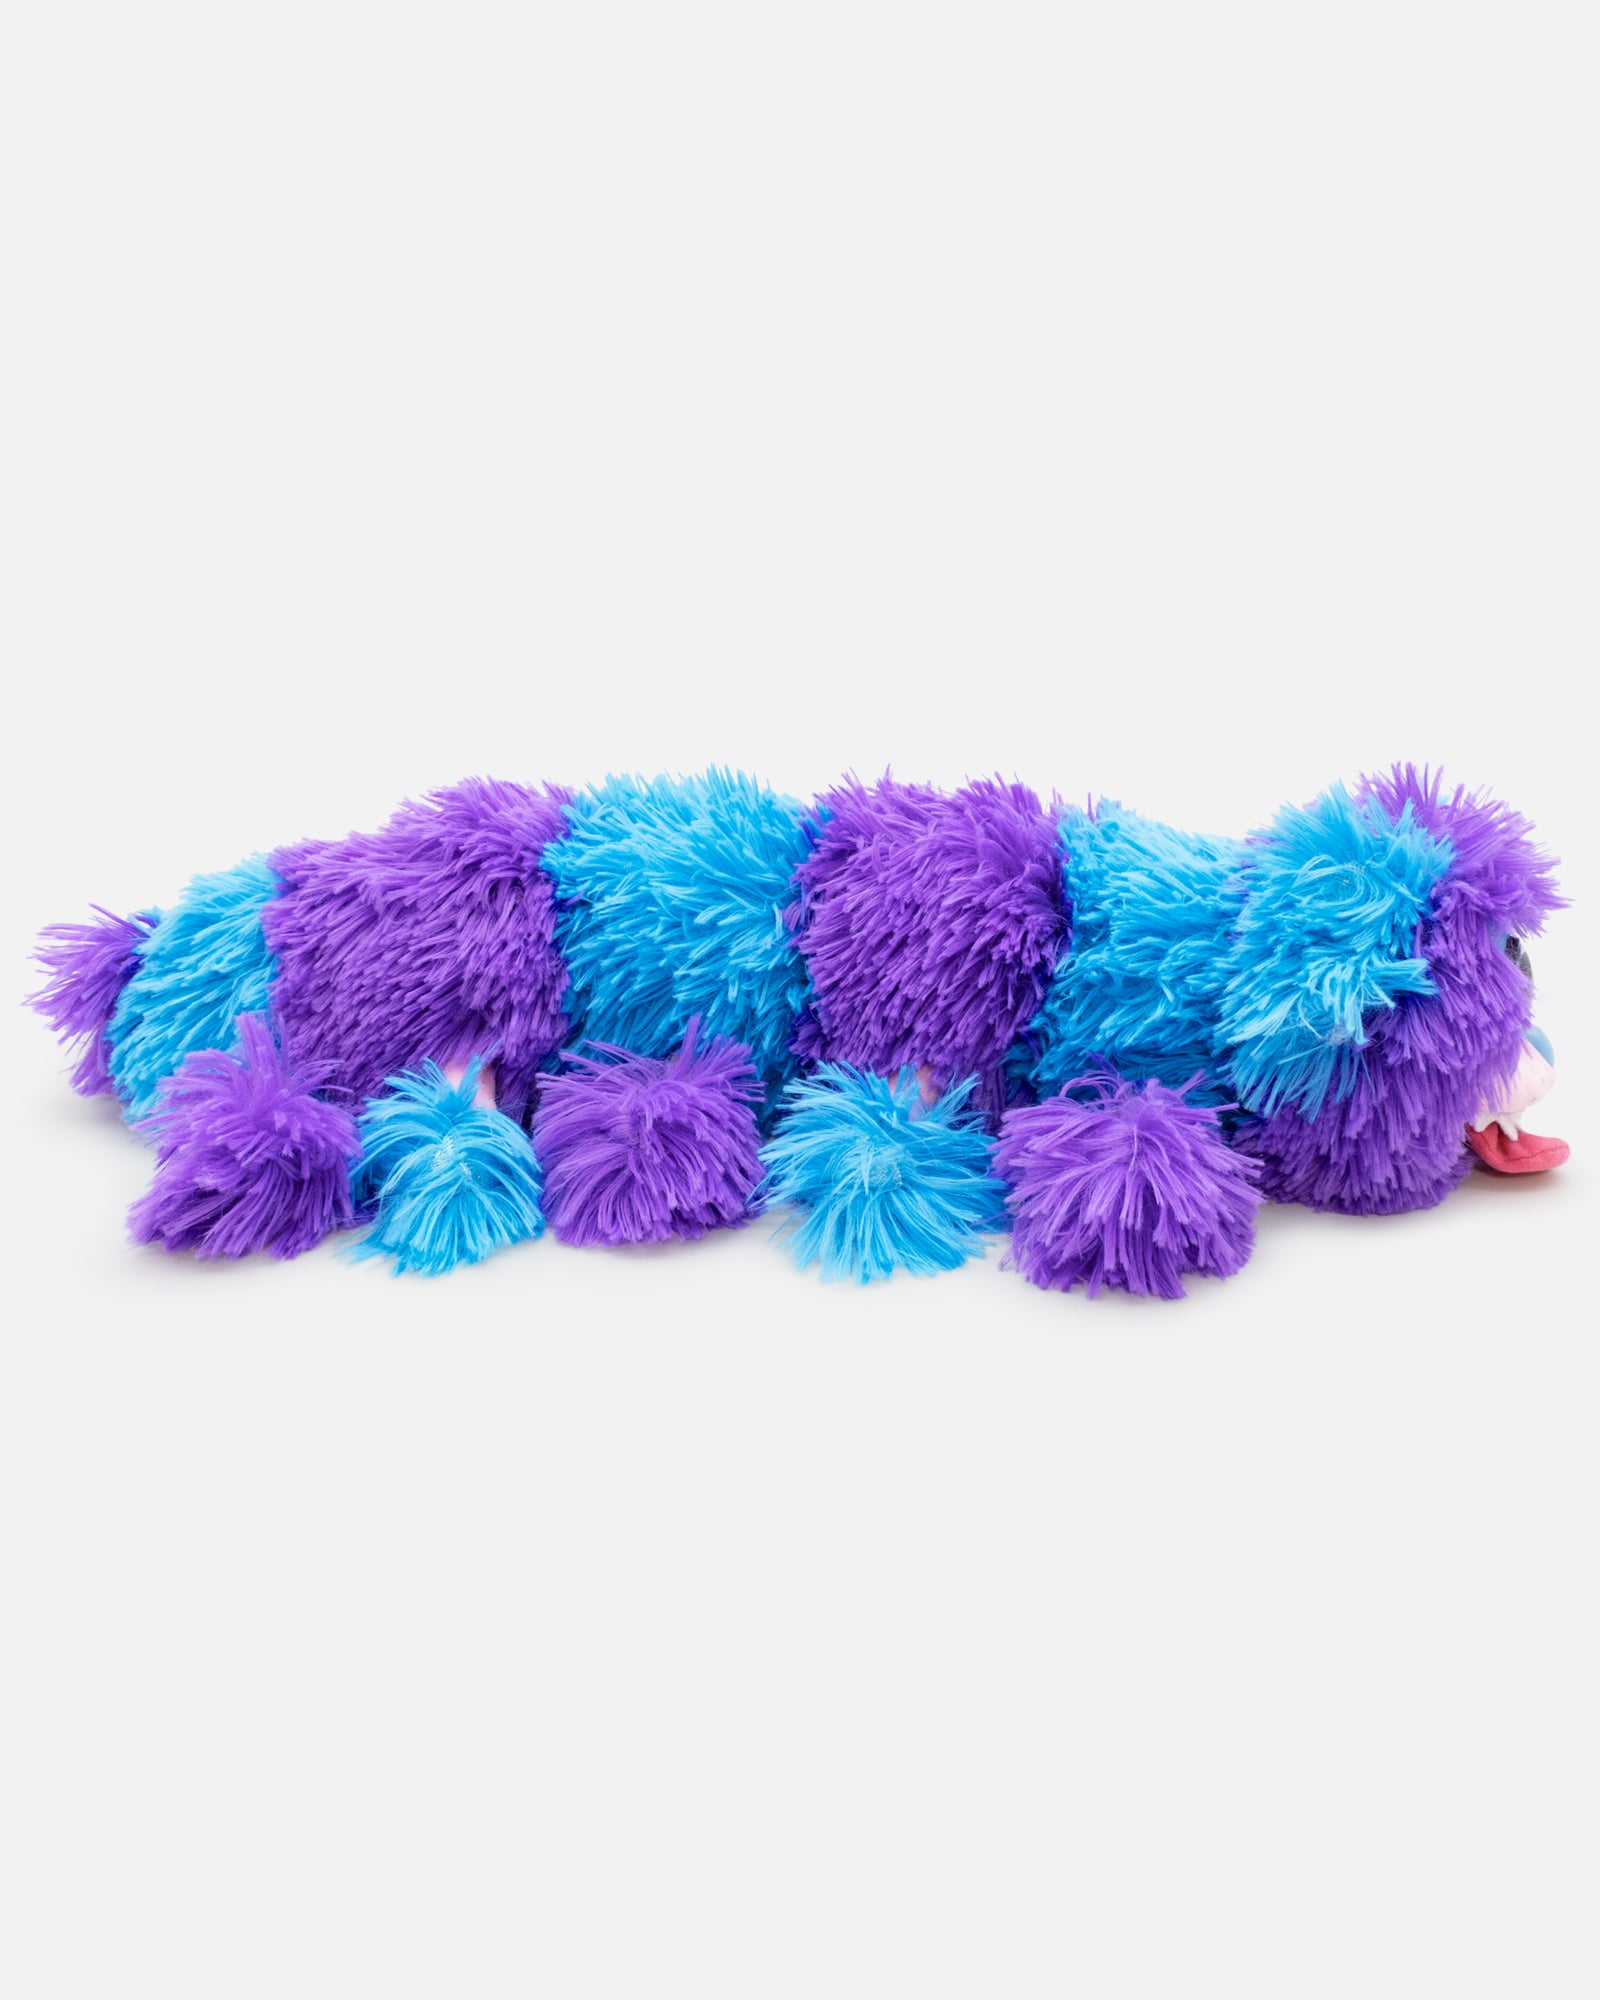 Compatible with Poppy Playtime Plush Caterpillar Algeria